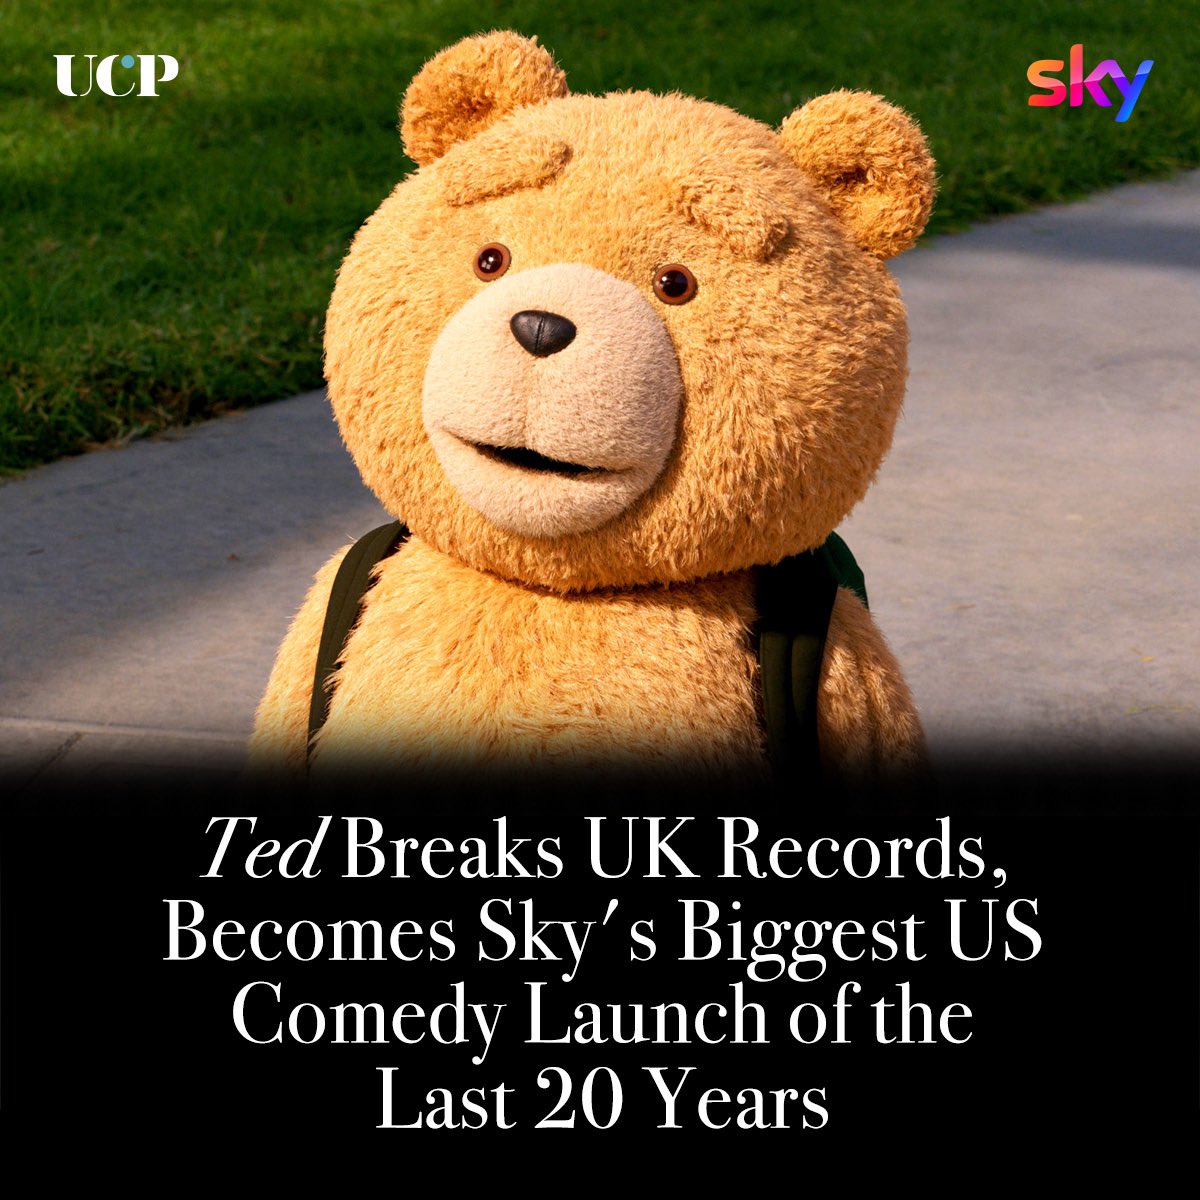 #TedSeries is an international hit! Not only does our thunder buddy have the No. 1 Original Comedy Series Streaming in the U.S. via @peacock according to Nielsen – but he also broke UK viewership records via @skytv!